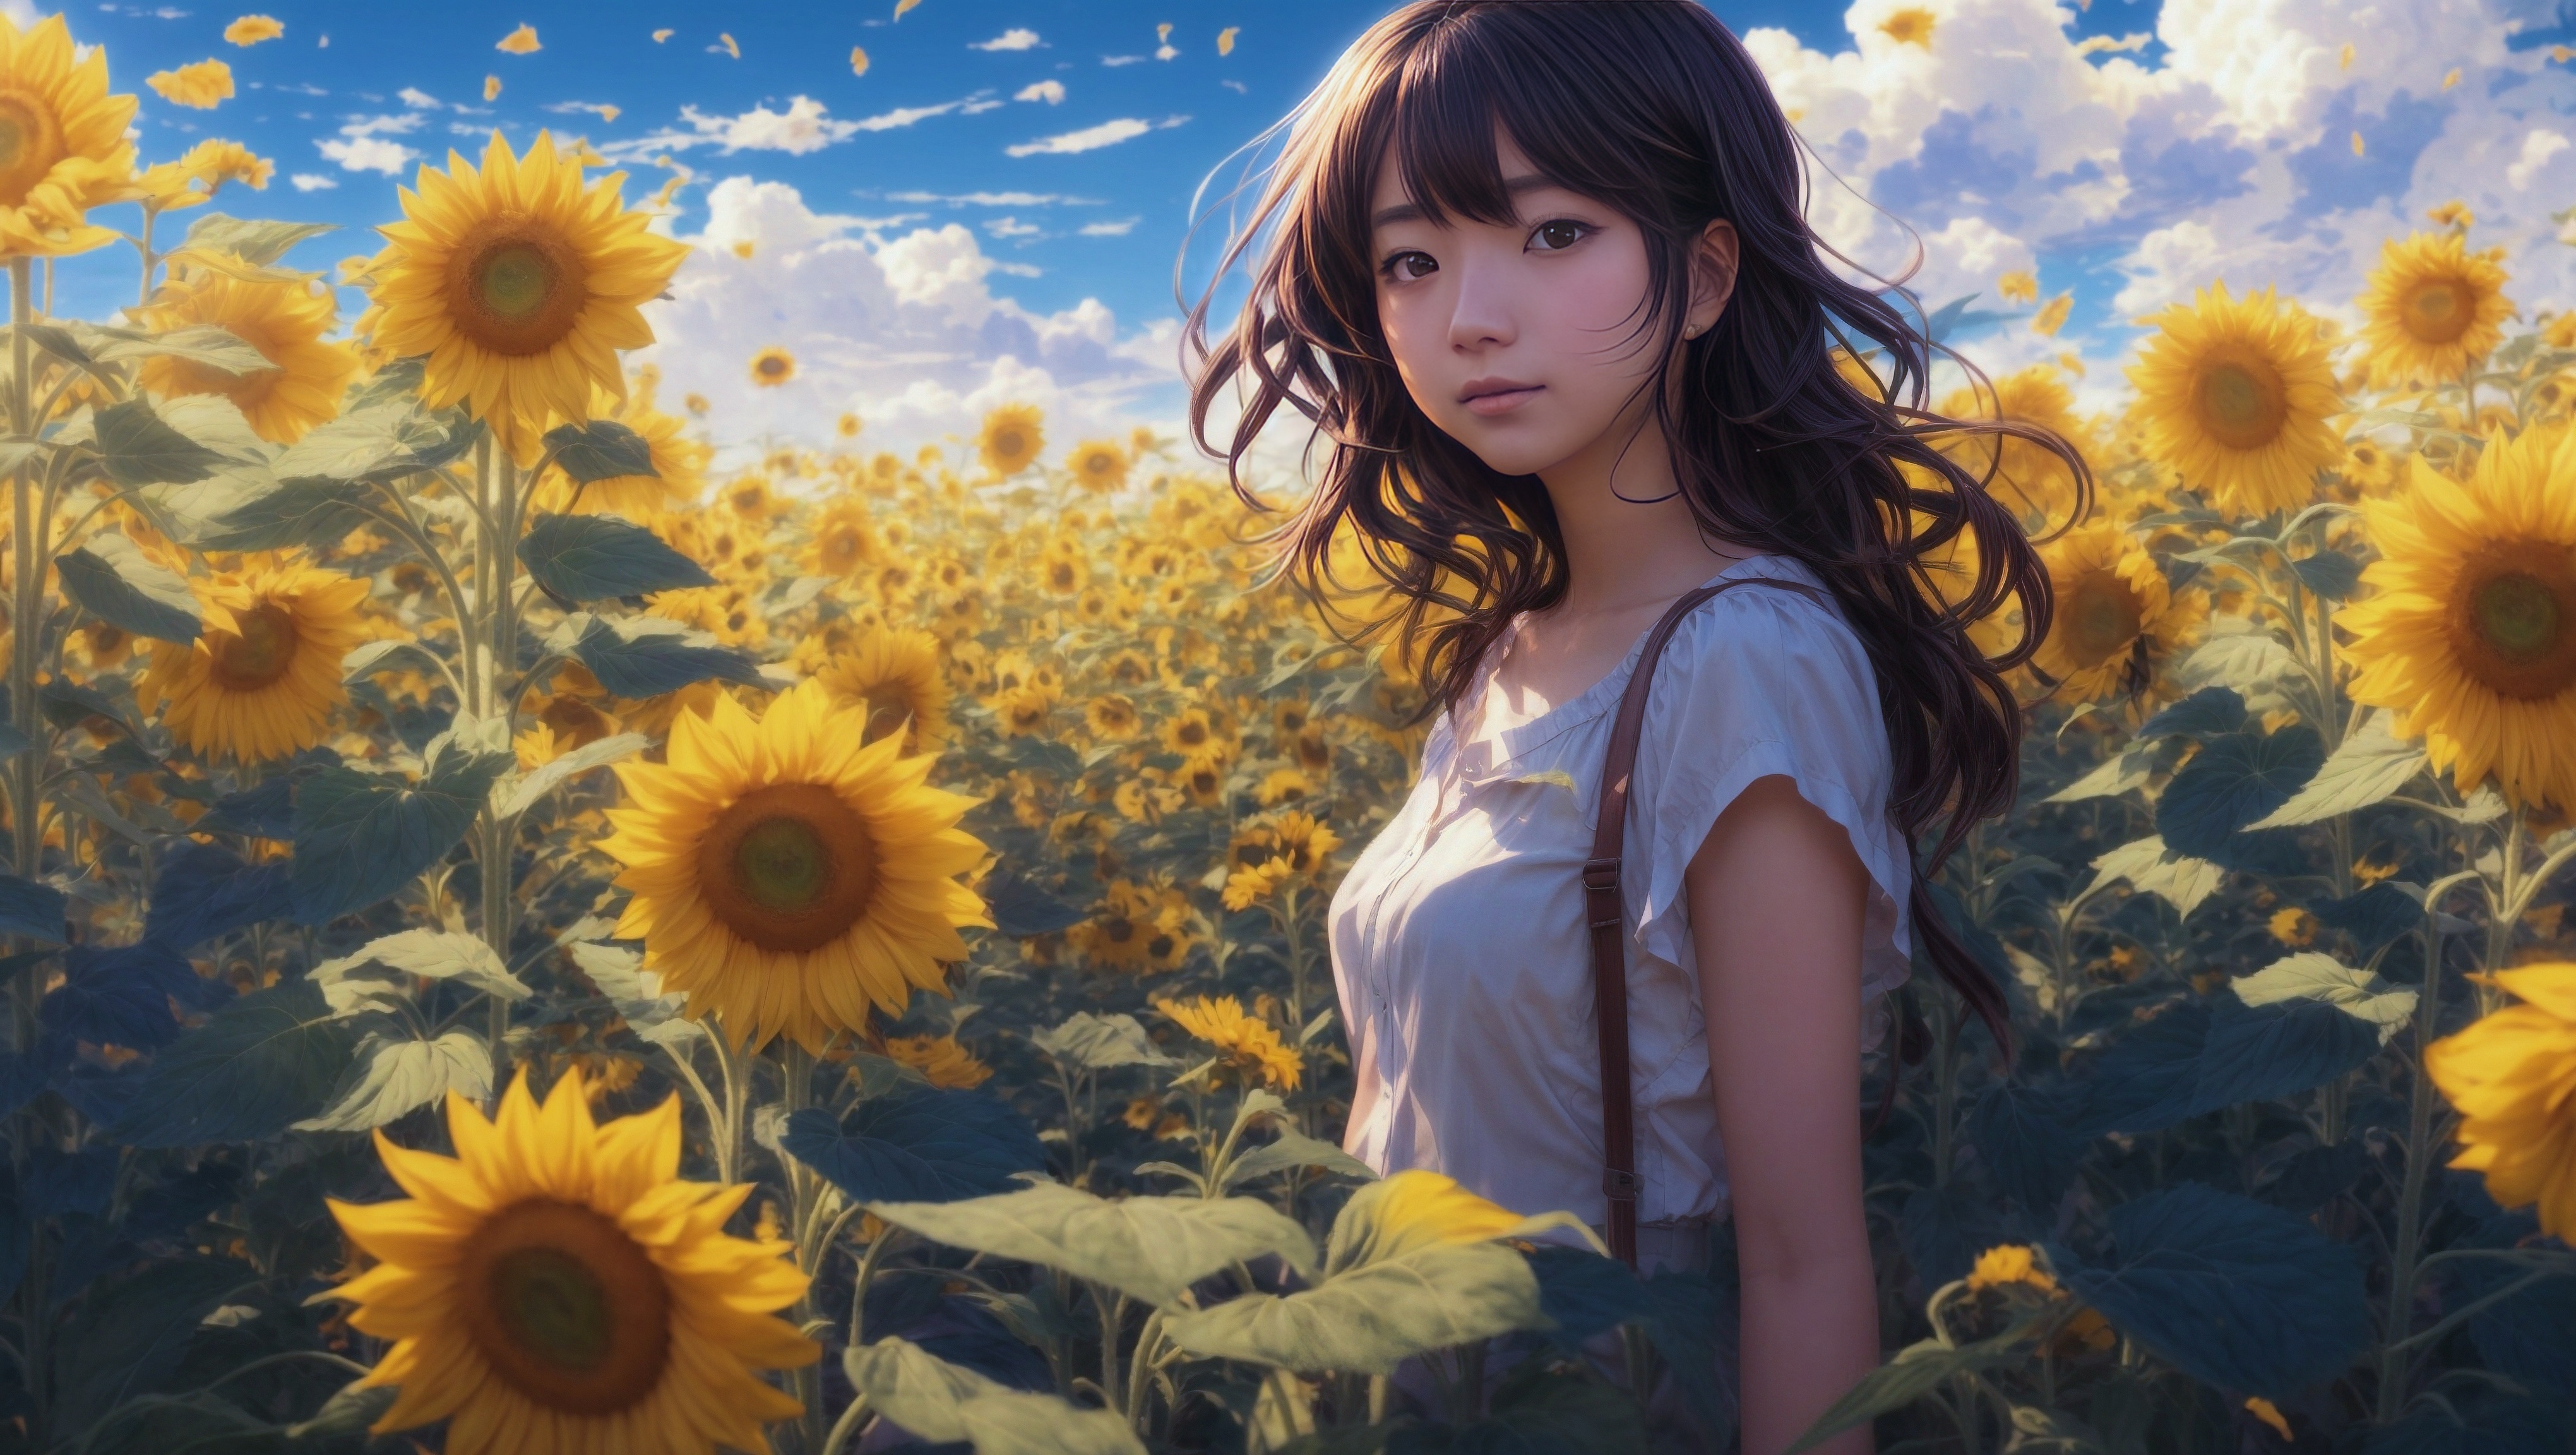 A woman posing in front of yellow sunflowers